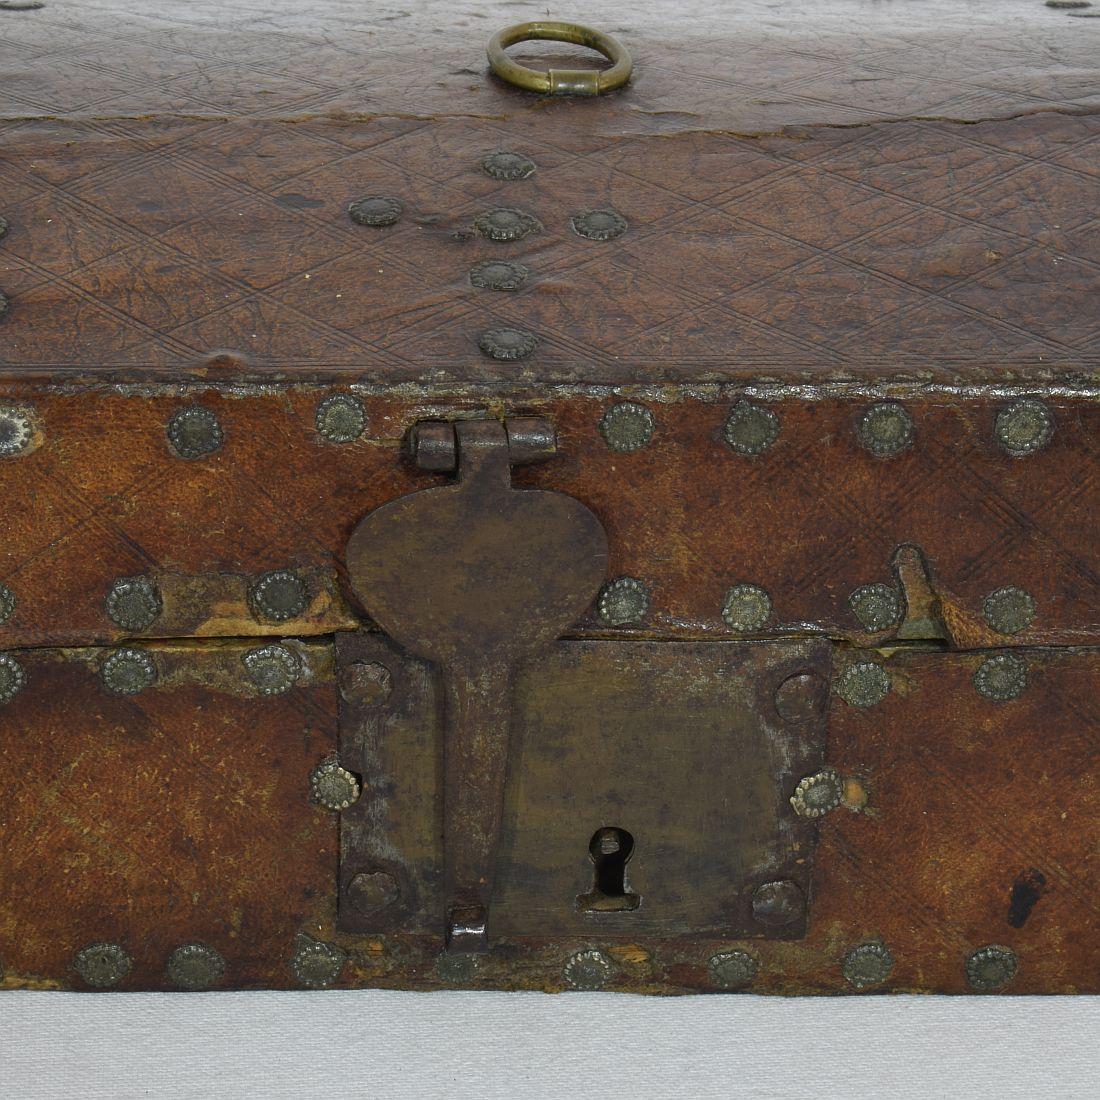 Small 17th Century, French Coffer or Box in Leather For Sale 2